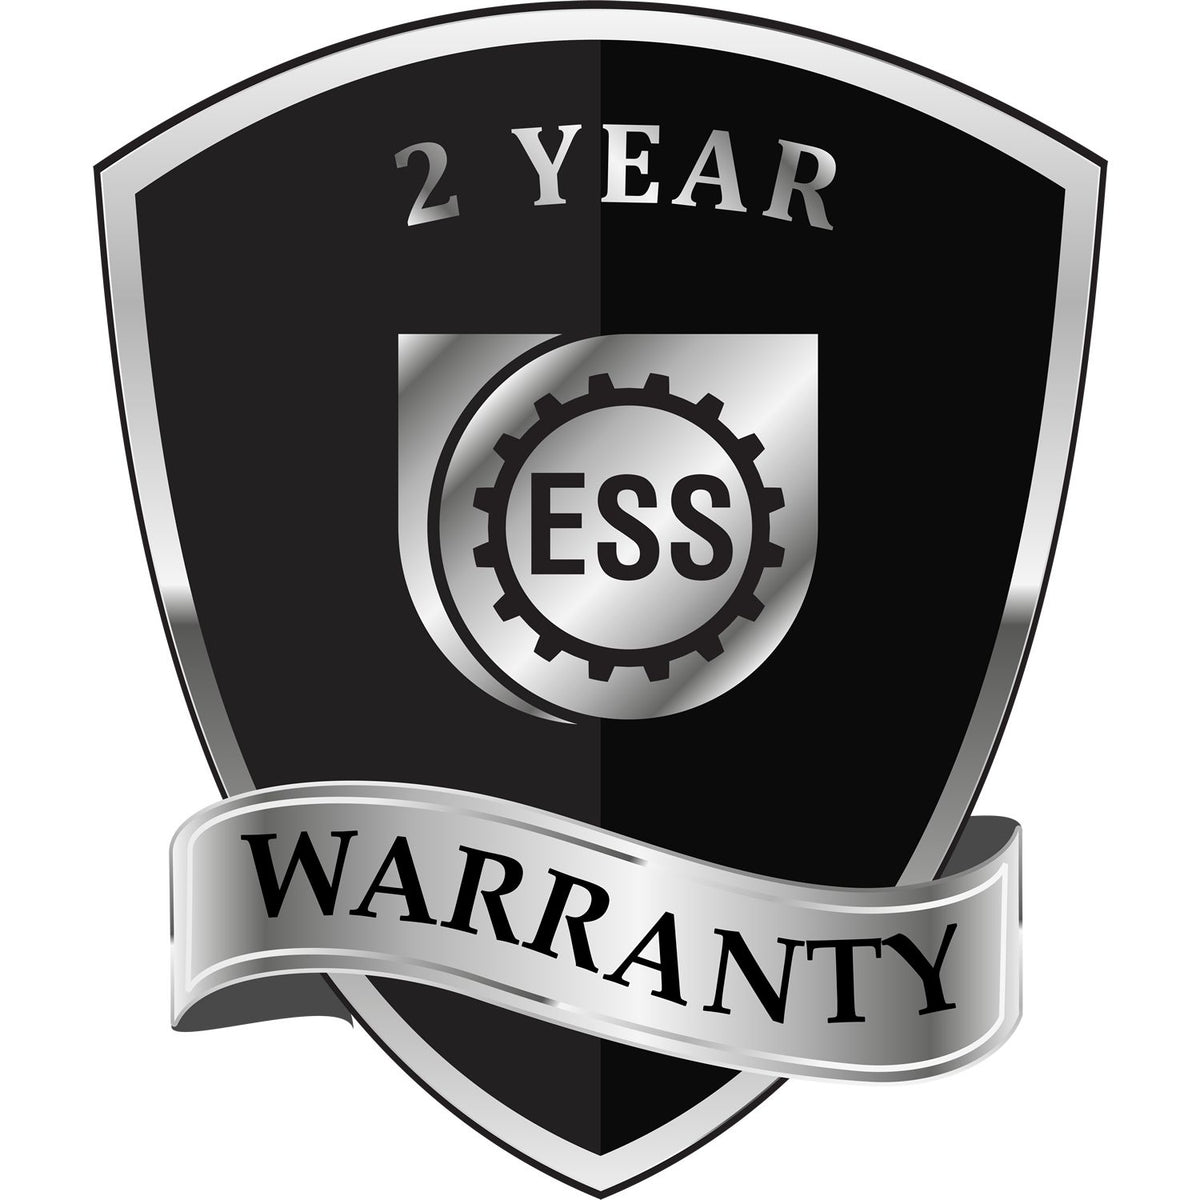 A badge or emblem showing a warranty icon for the Long Reach Illinois PE Seal